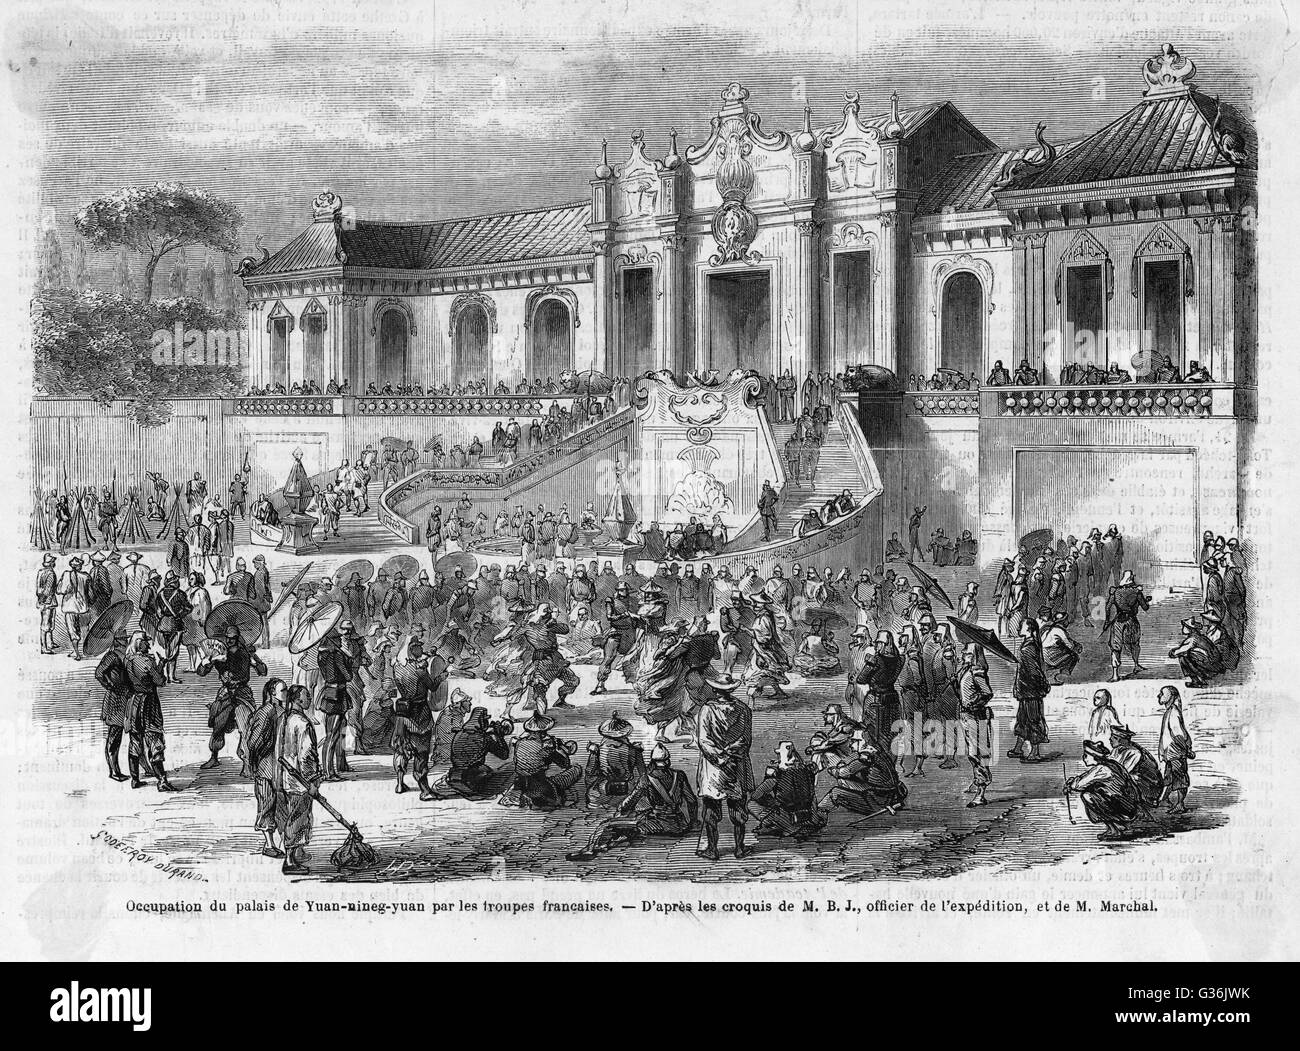 The British High Commissioner to China, Lord Elgin, ordering the destruction of the Summer Palace in Beijing (Peking), which was then carried out by French and British troops during the Second Opium War on 6th October 1860..         Date: 1860 Stock Photo